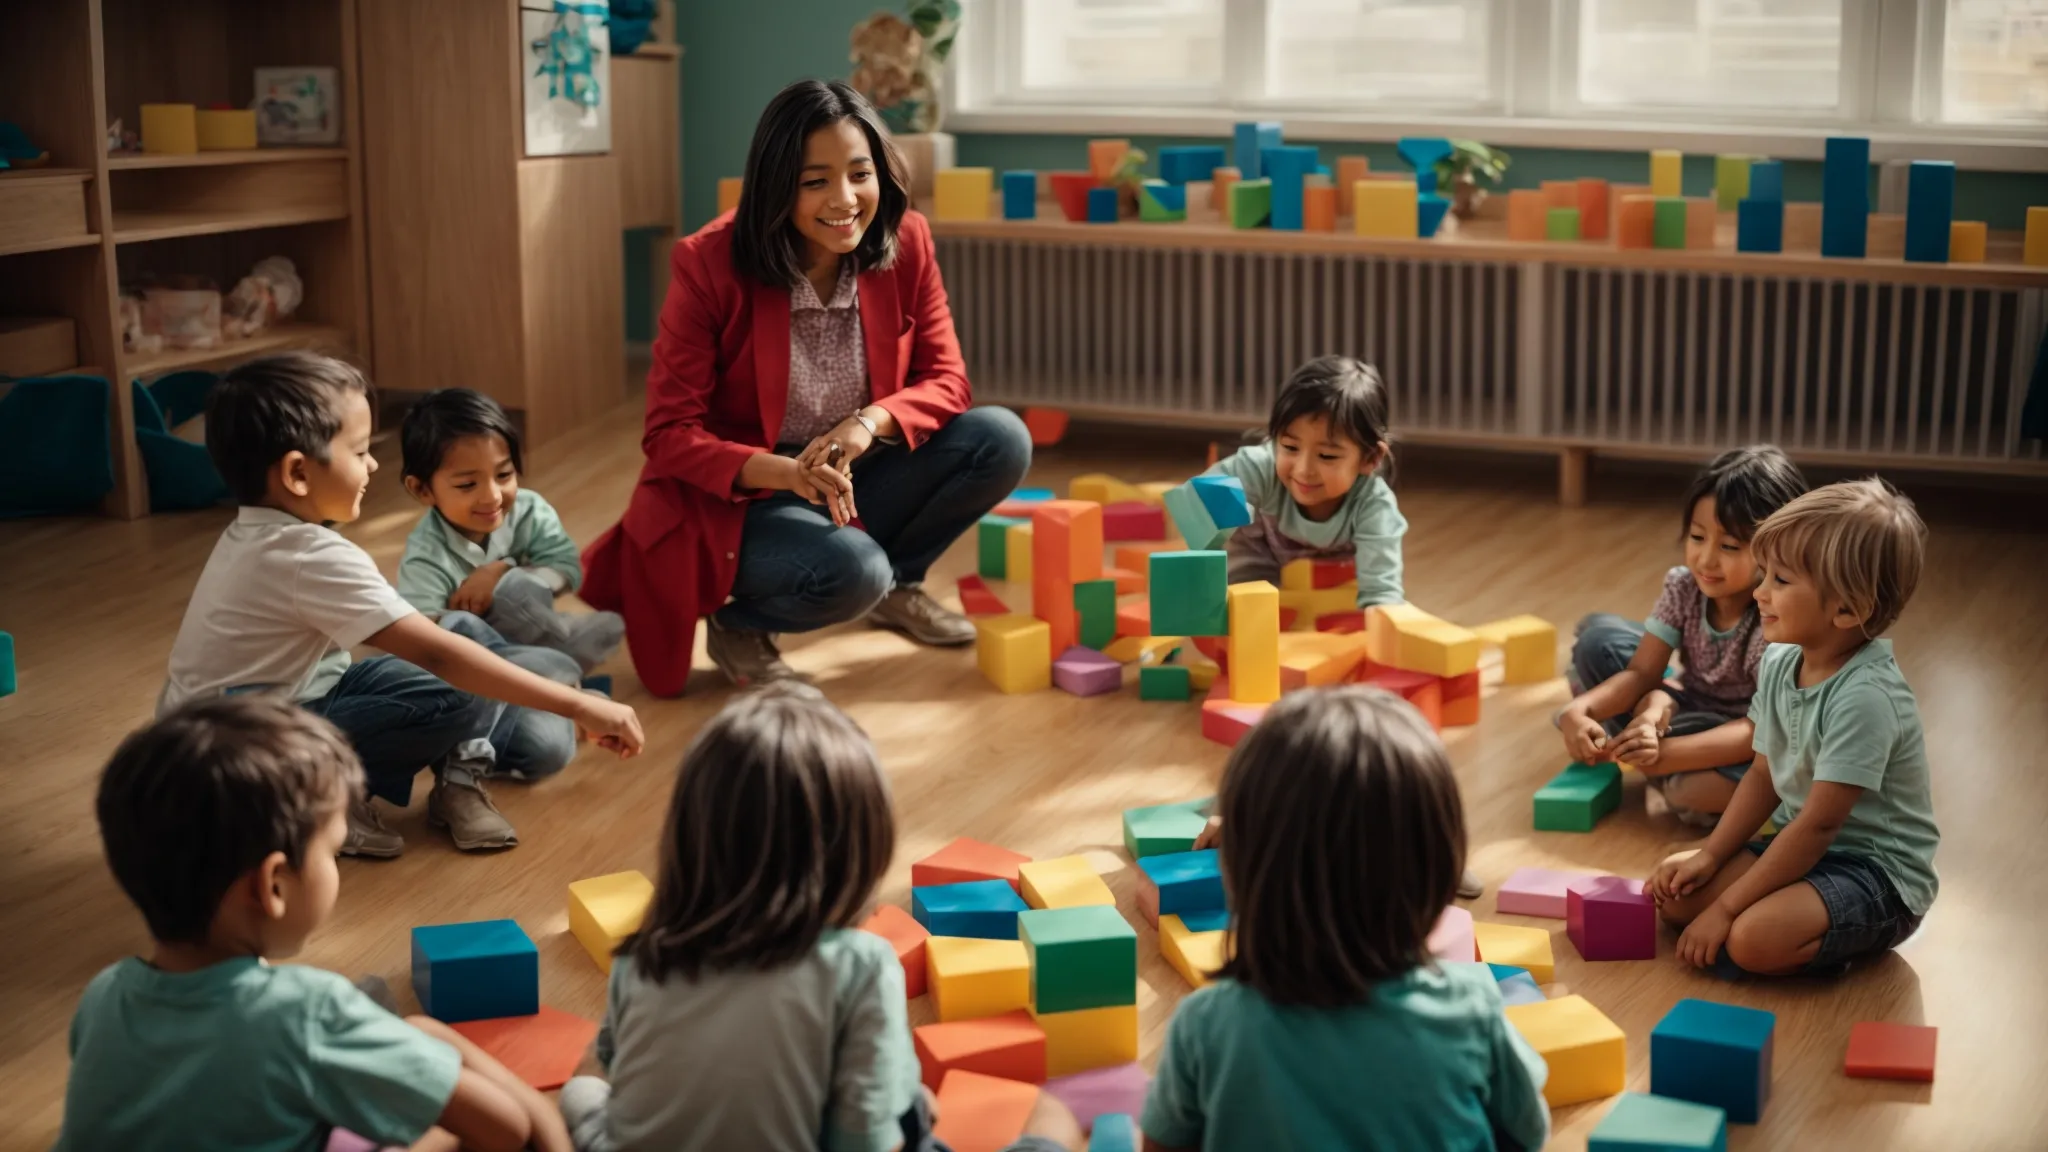 a kindergarten teacher sits in a circle with children as they excitedly reach for colorful blocks to build new shapes together.